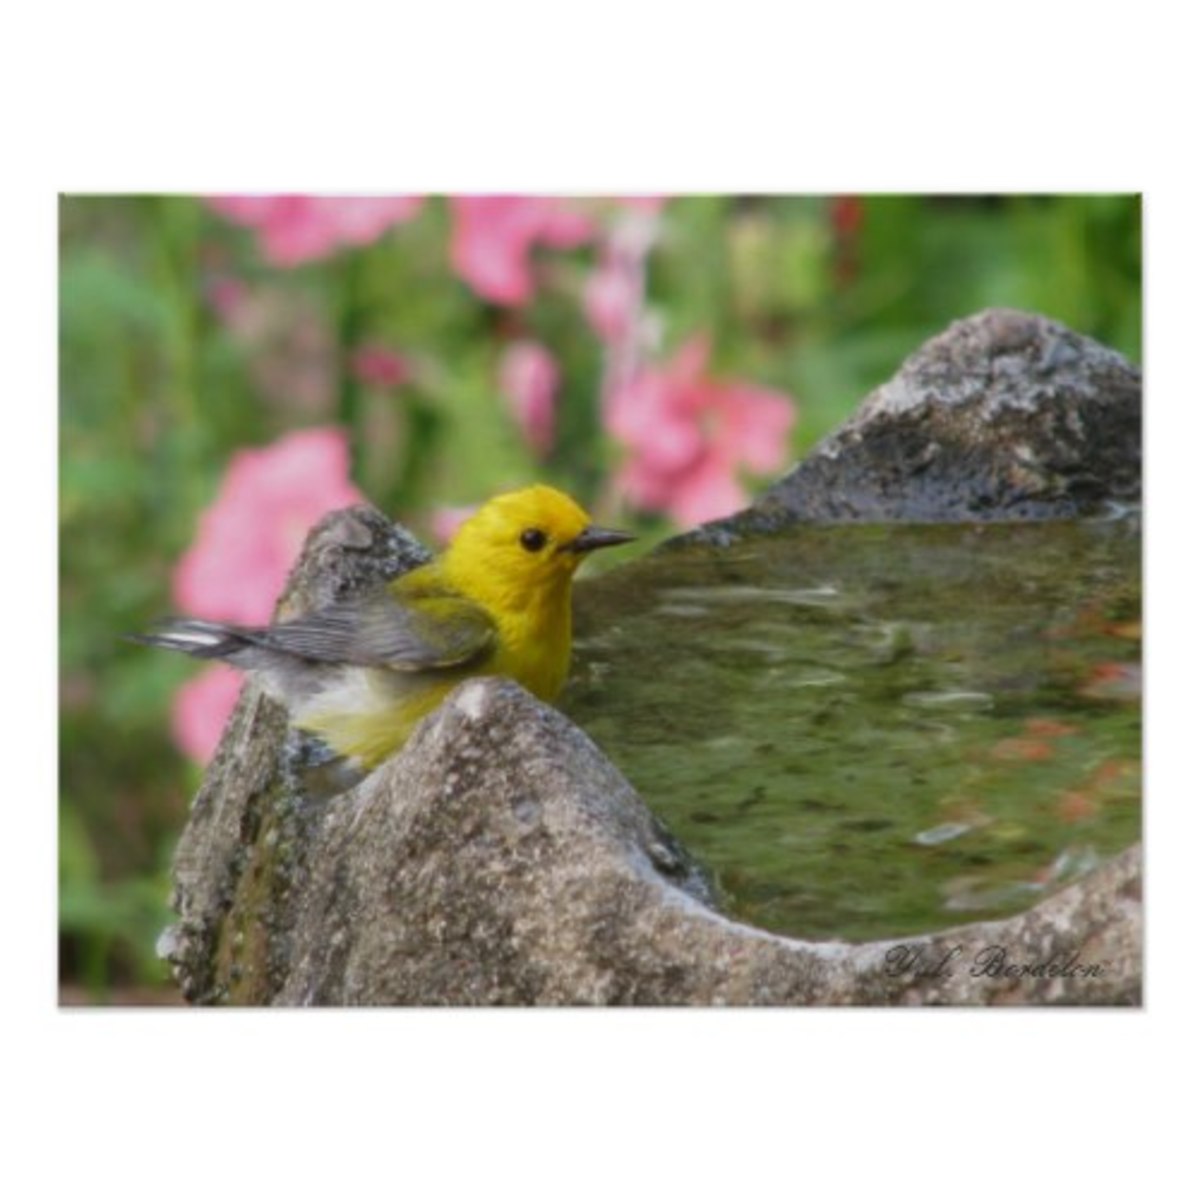 Providing water for birds and wildlife will provide them with one of the necessities of life.